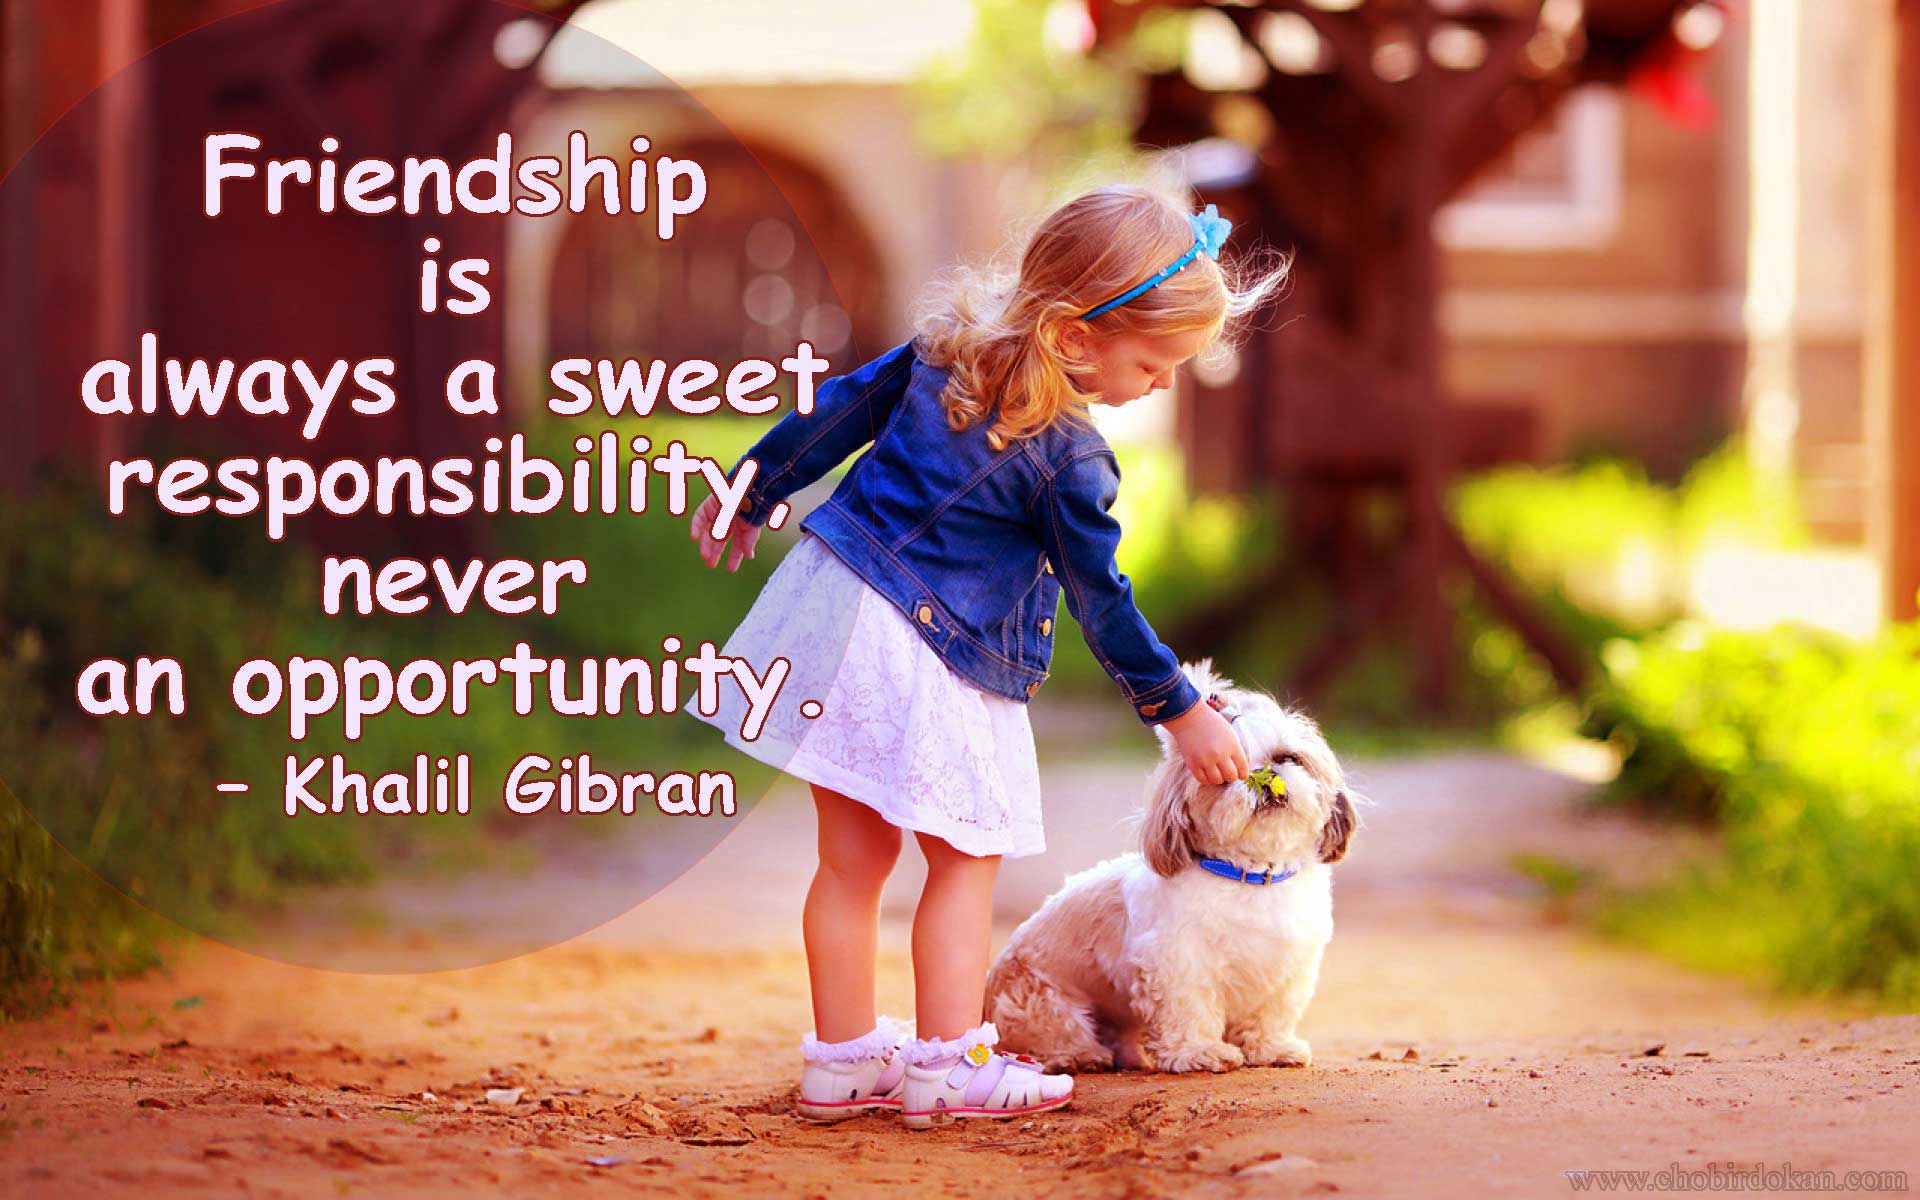 Happy friendship day 2016 pictures with quotes (3)